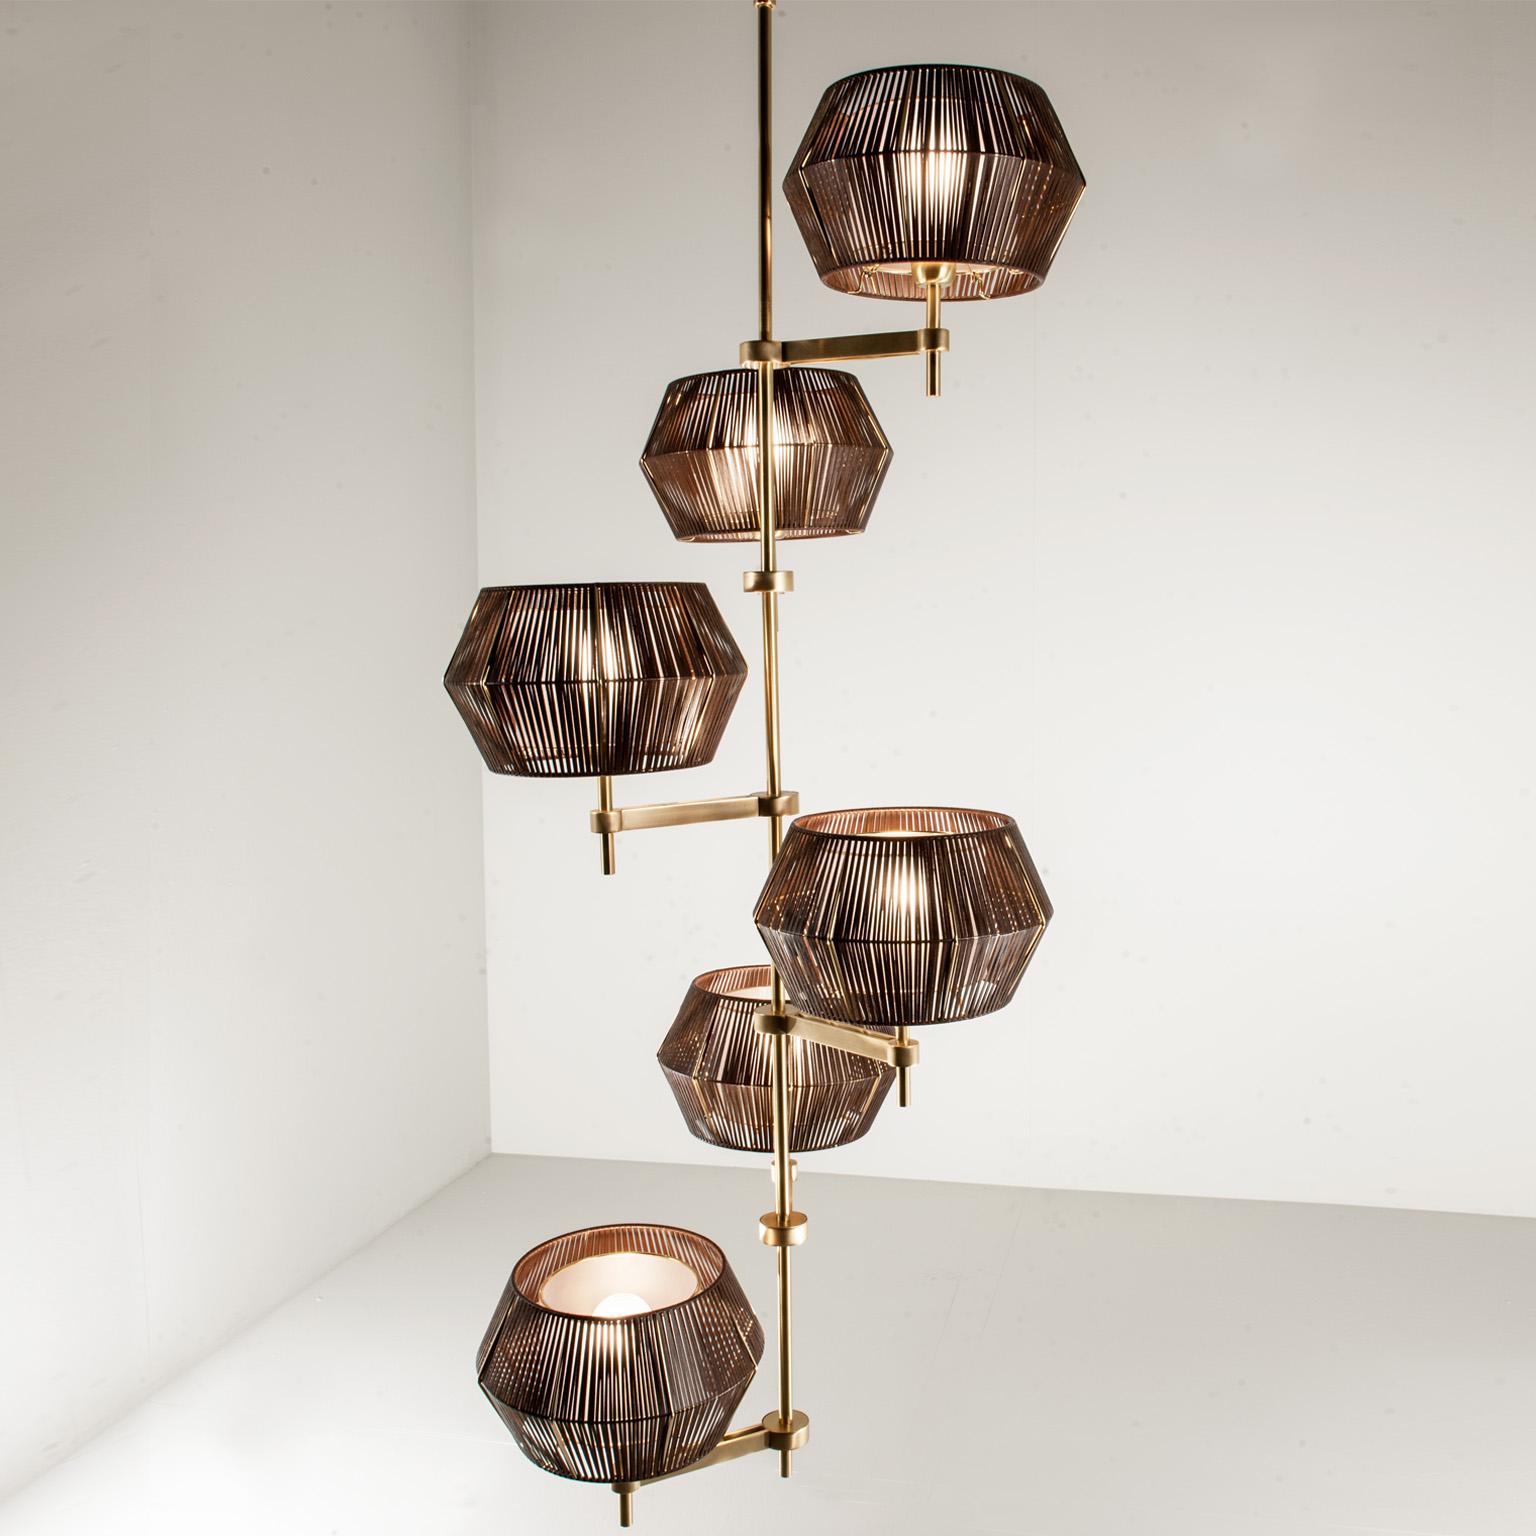 The peculiarity that makes this collection unique is the lampshade and its particular shape: available in brown eco leather and white string. A system of repeating proportions and modules, wisely assembled by the experts hands of the artisans. The